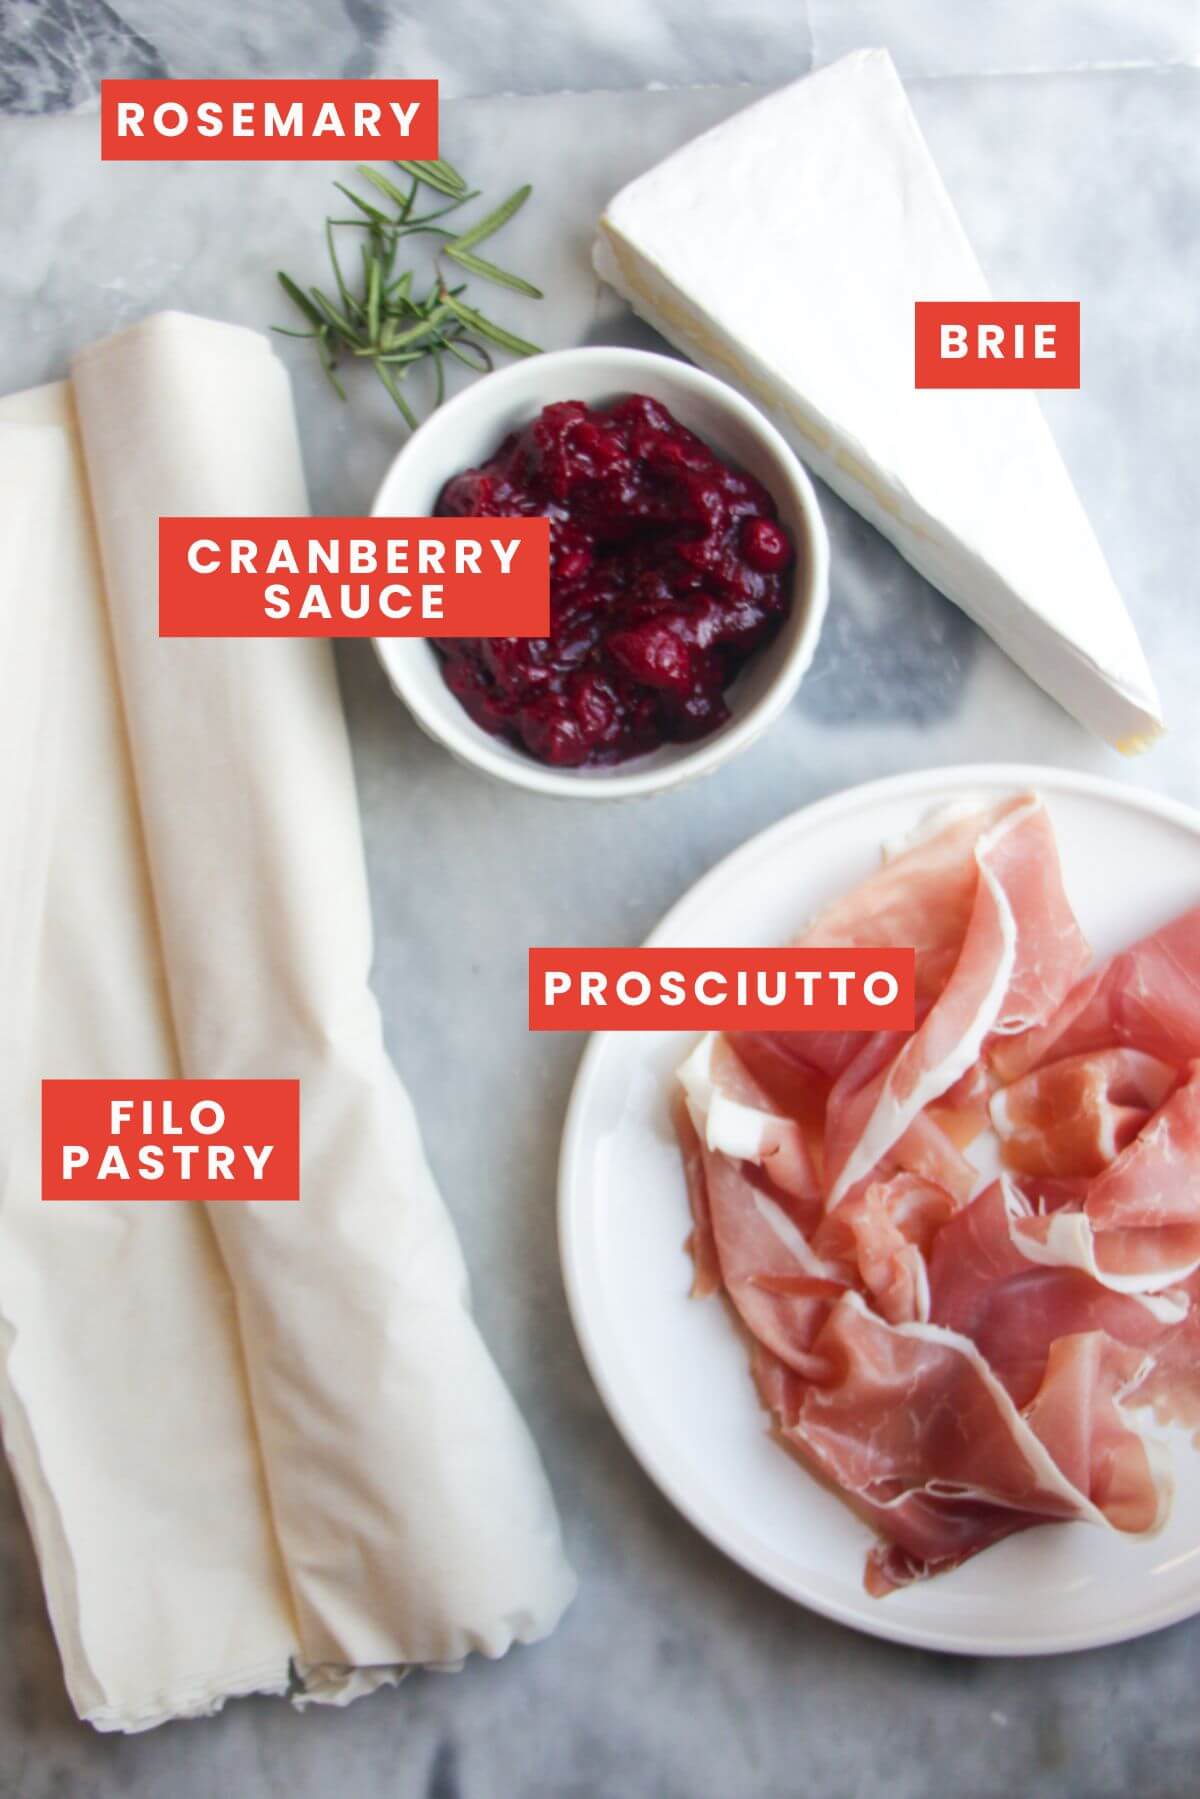 Ingredients for brie, cranberry and prosciutto filo bites laid out on a grey marble background and labelled.